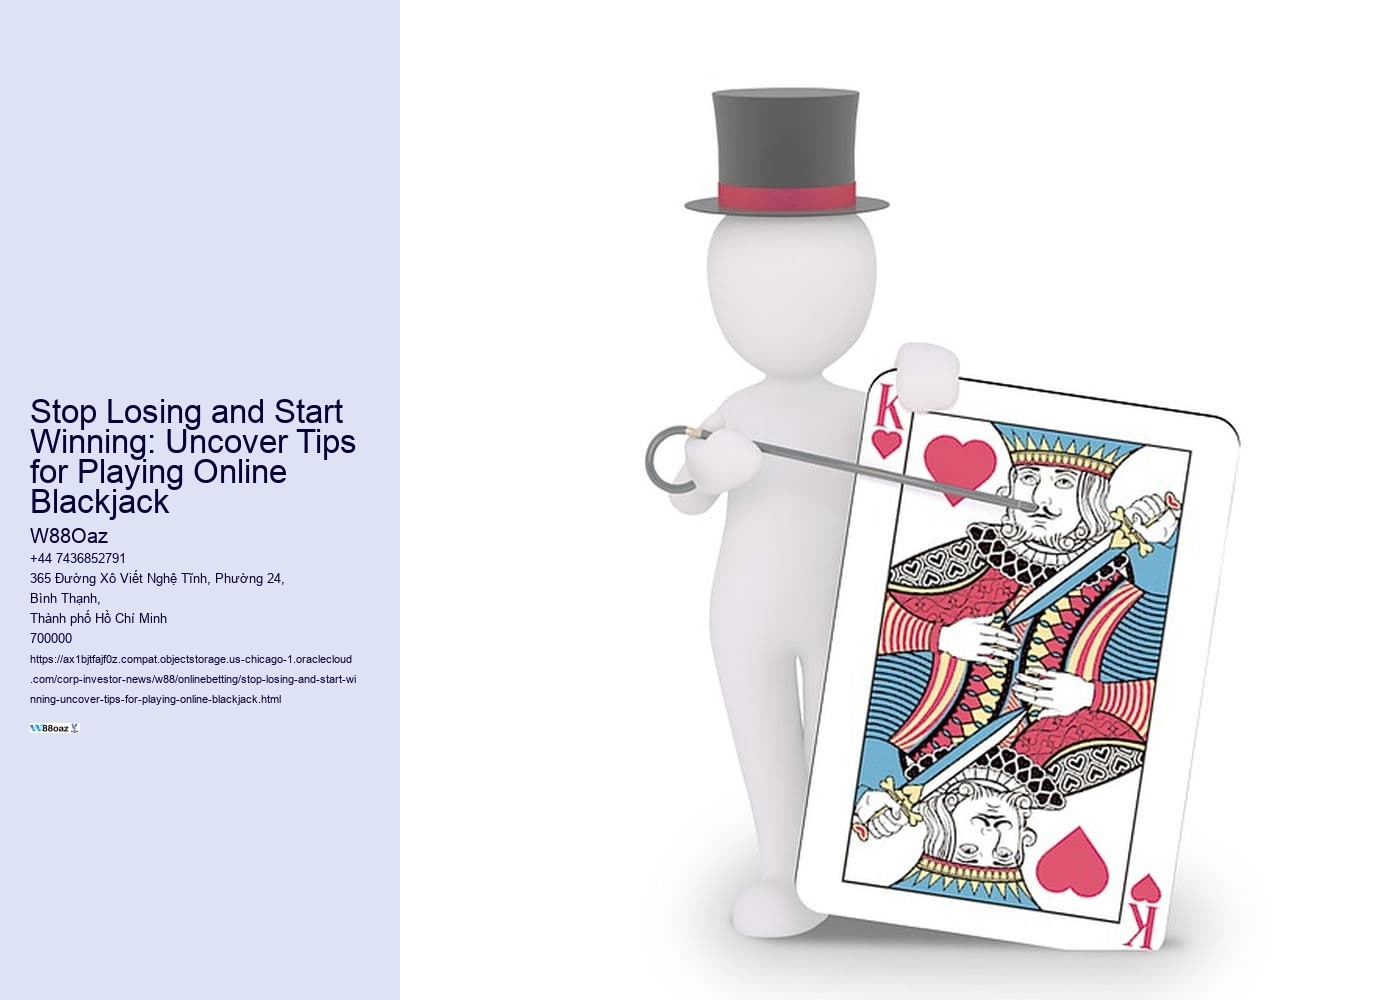 Stop Losing and Start Winning: Uncover Tips for Playing Online Blackjack 